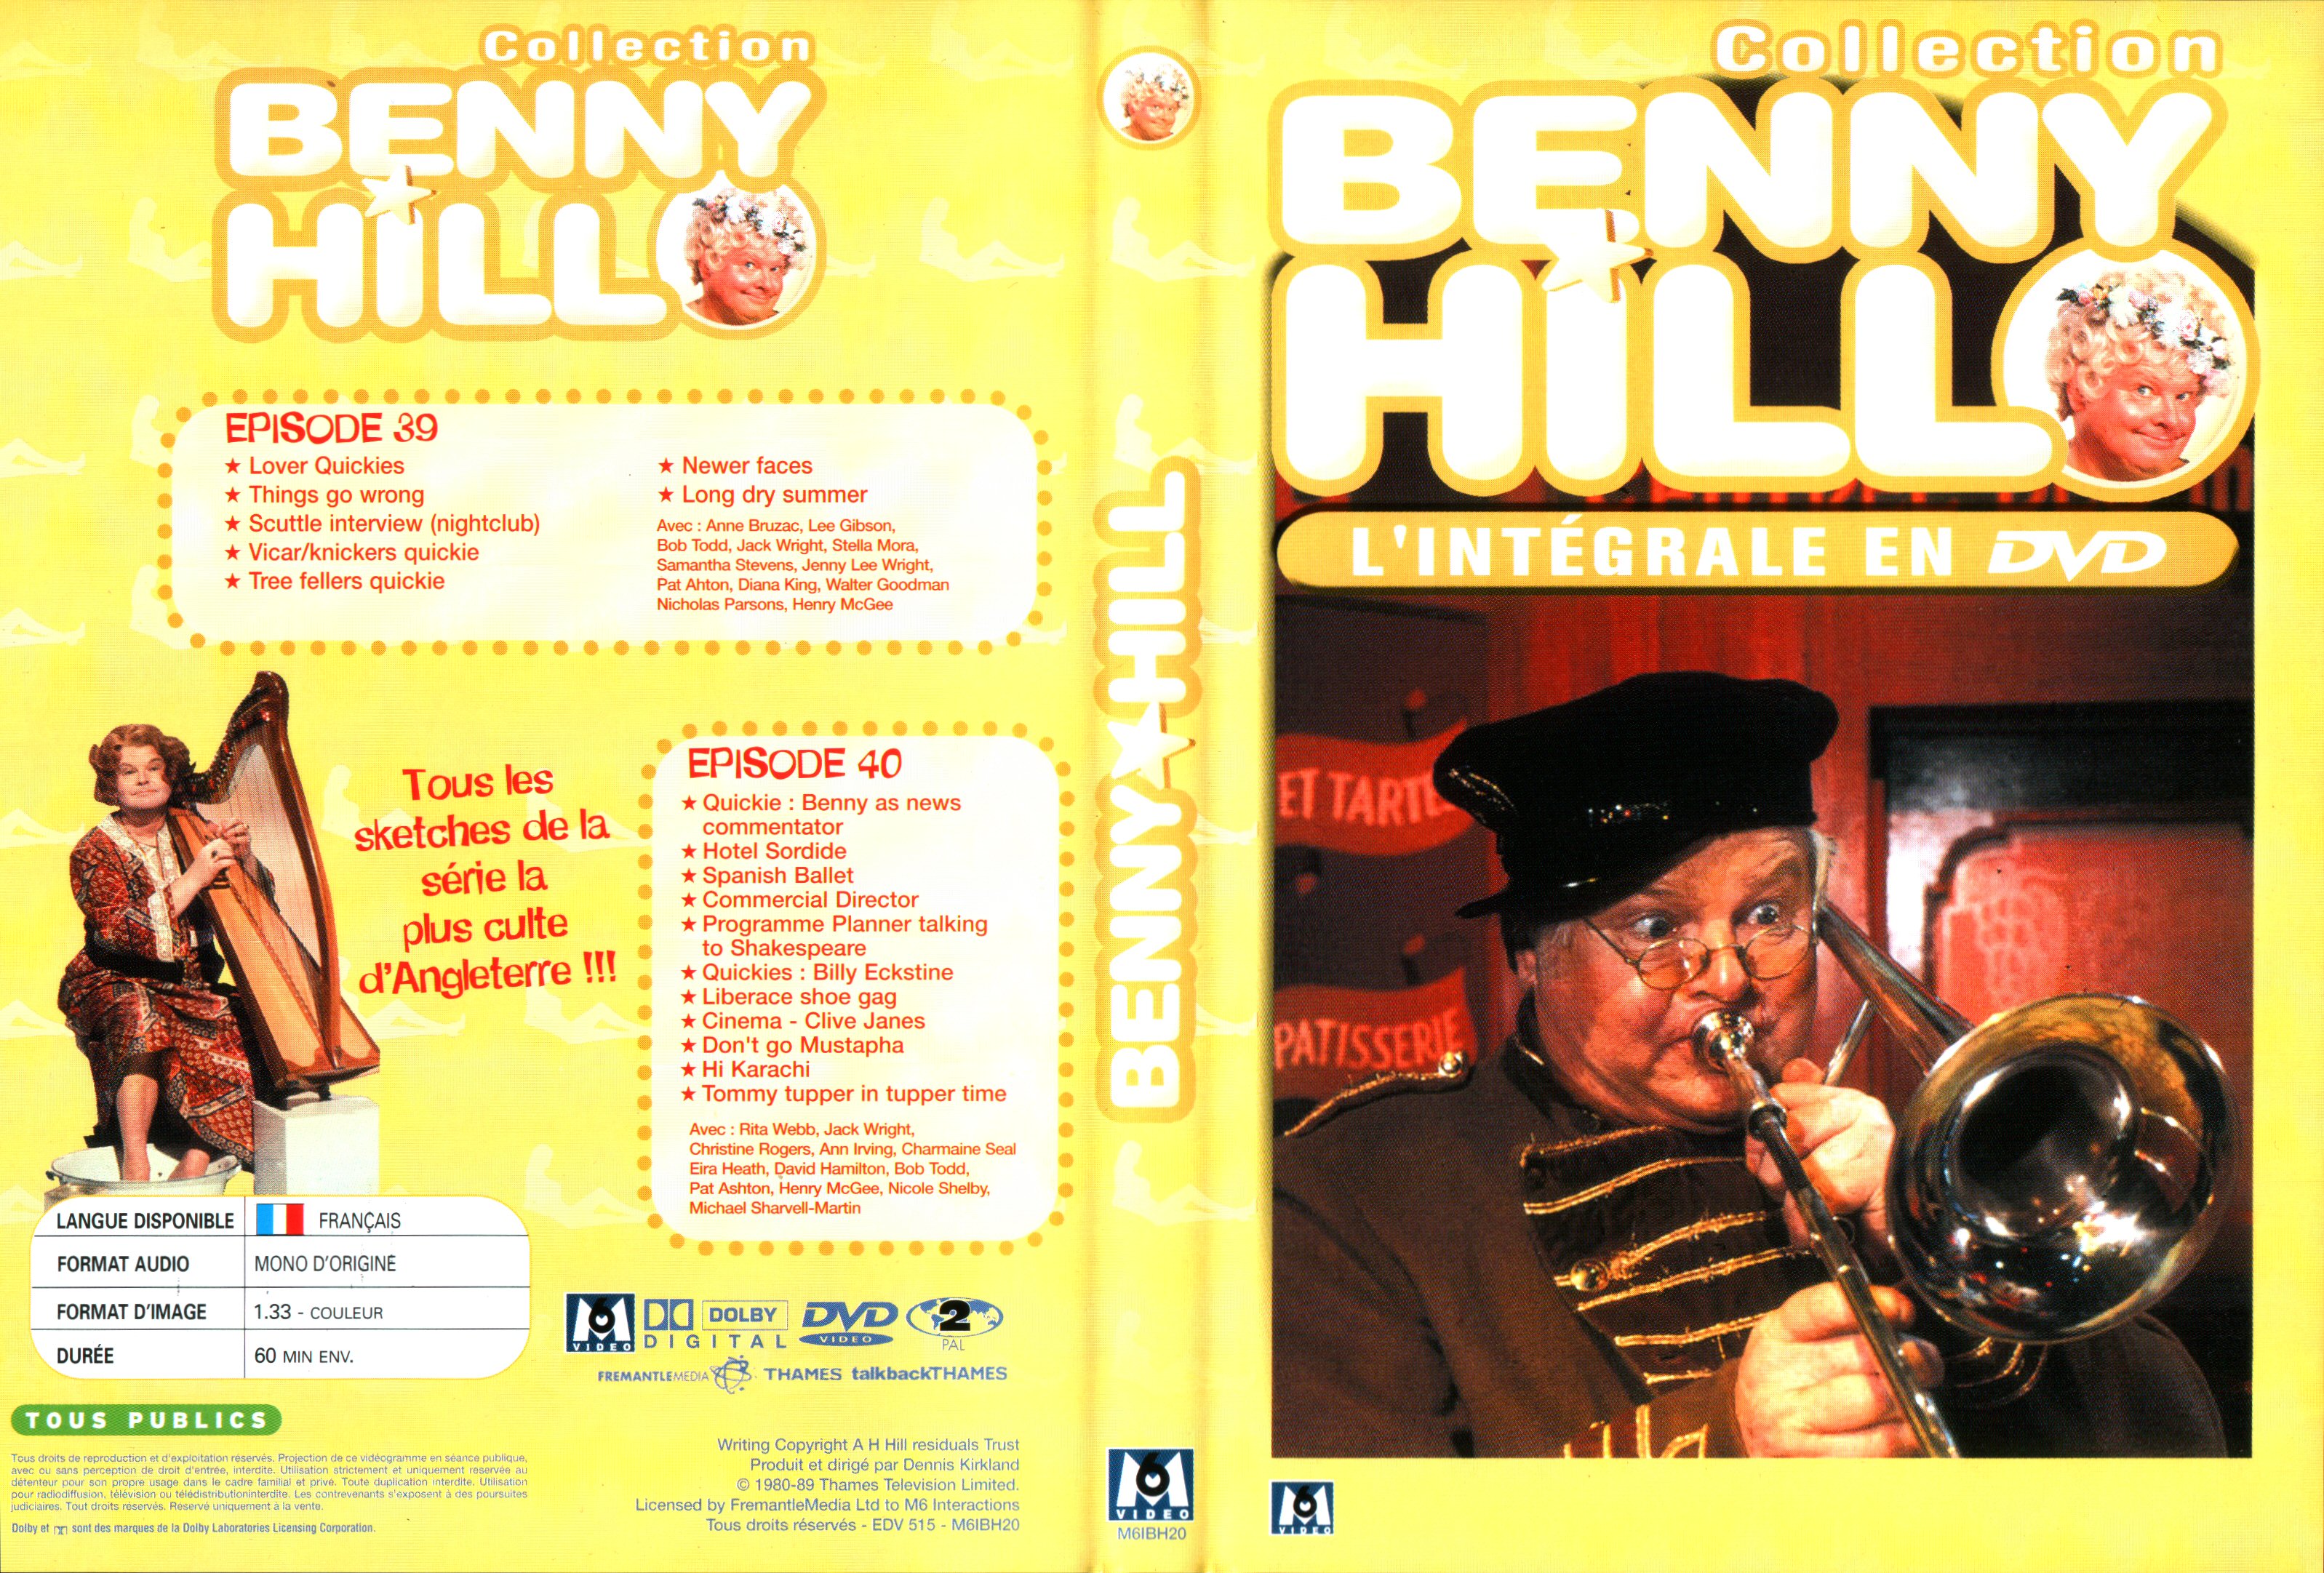 Jaquette DVD Benny Hill collection Episodes 39-40